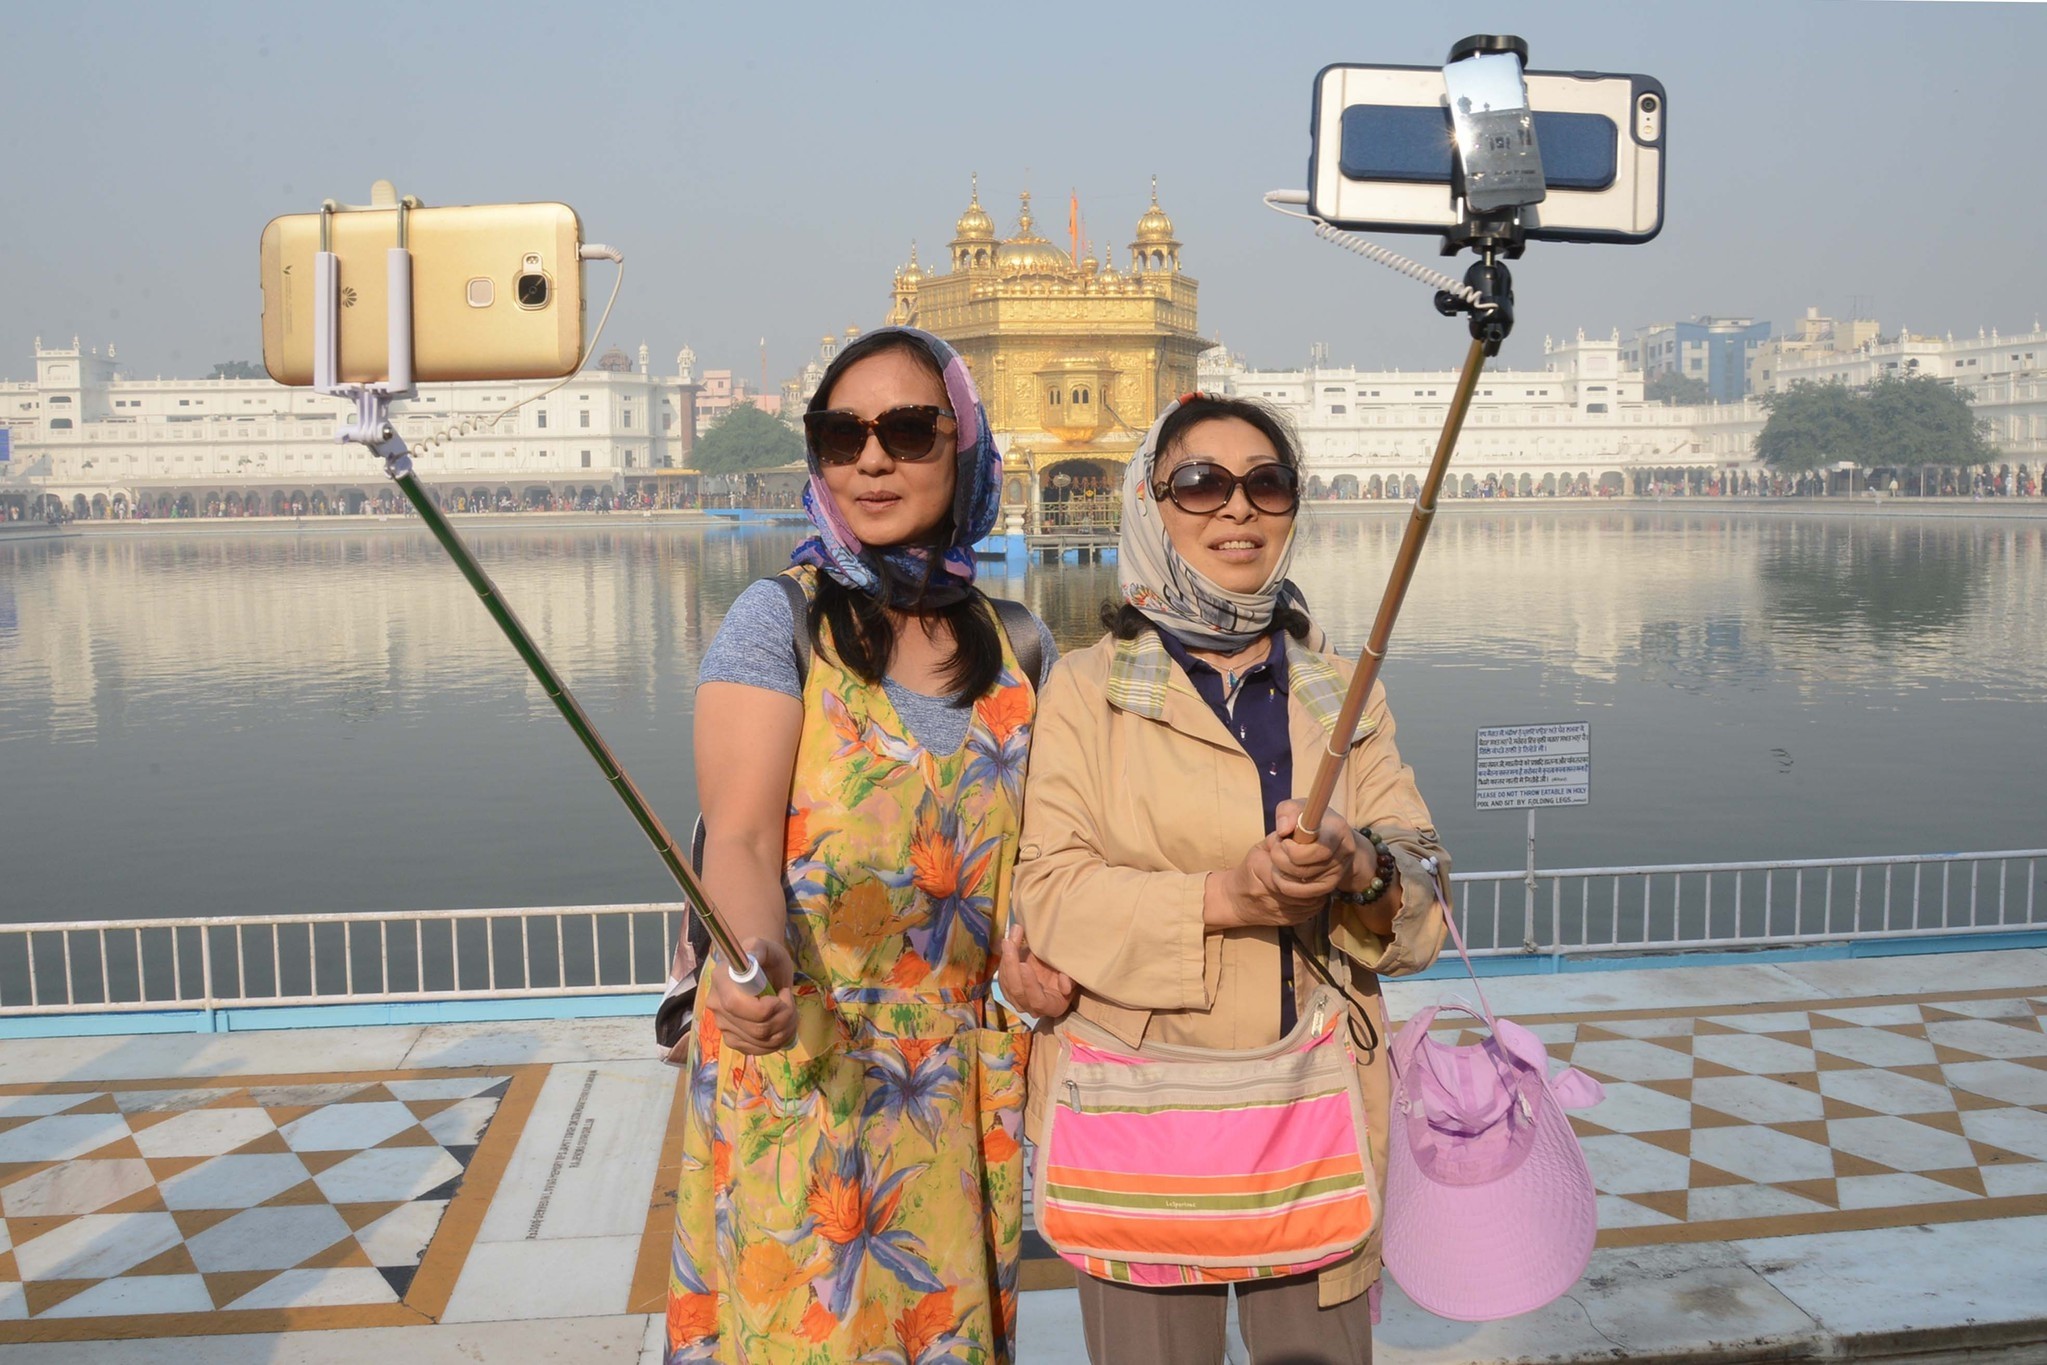 Chinese tourists take a 'selfie' at the Golden Temple in Amritsar on November 14, 2016, as Sikh devotees mark the 547th birth anniversary of Sri Guru Nanak Dev. (AFP Photo)